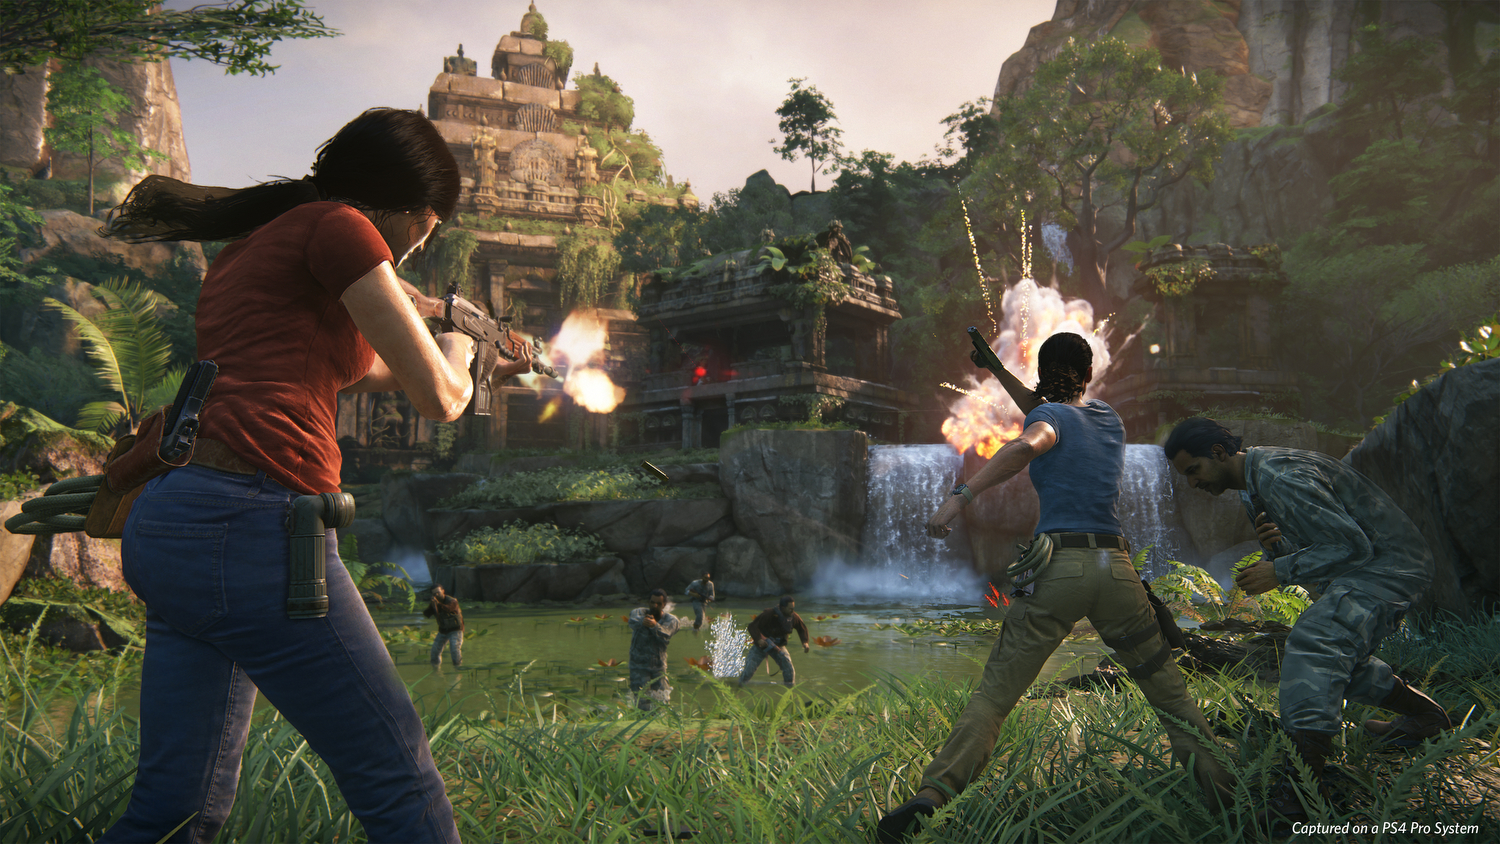 Uncharted: Legacy of Thieves PC Release Date Leaked